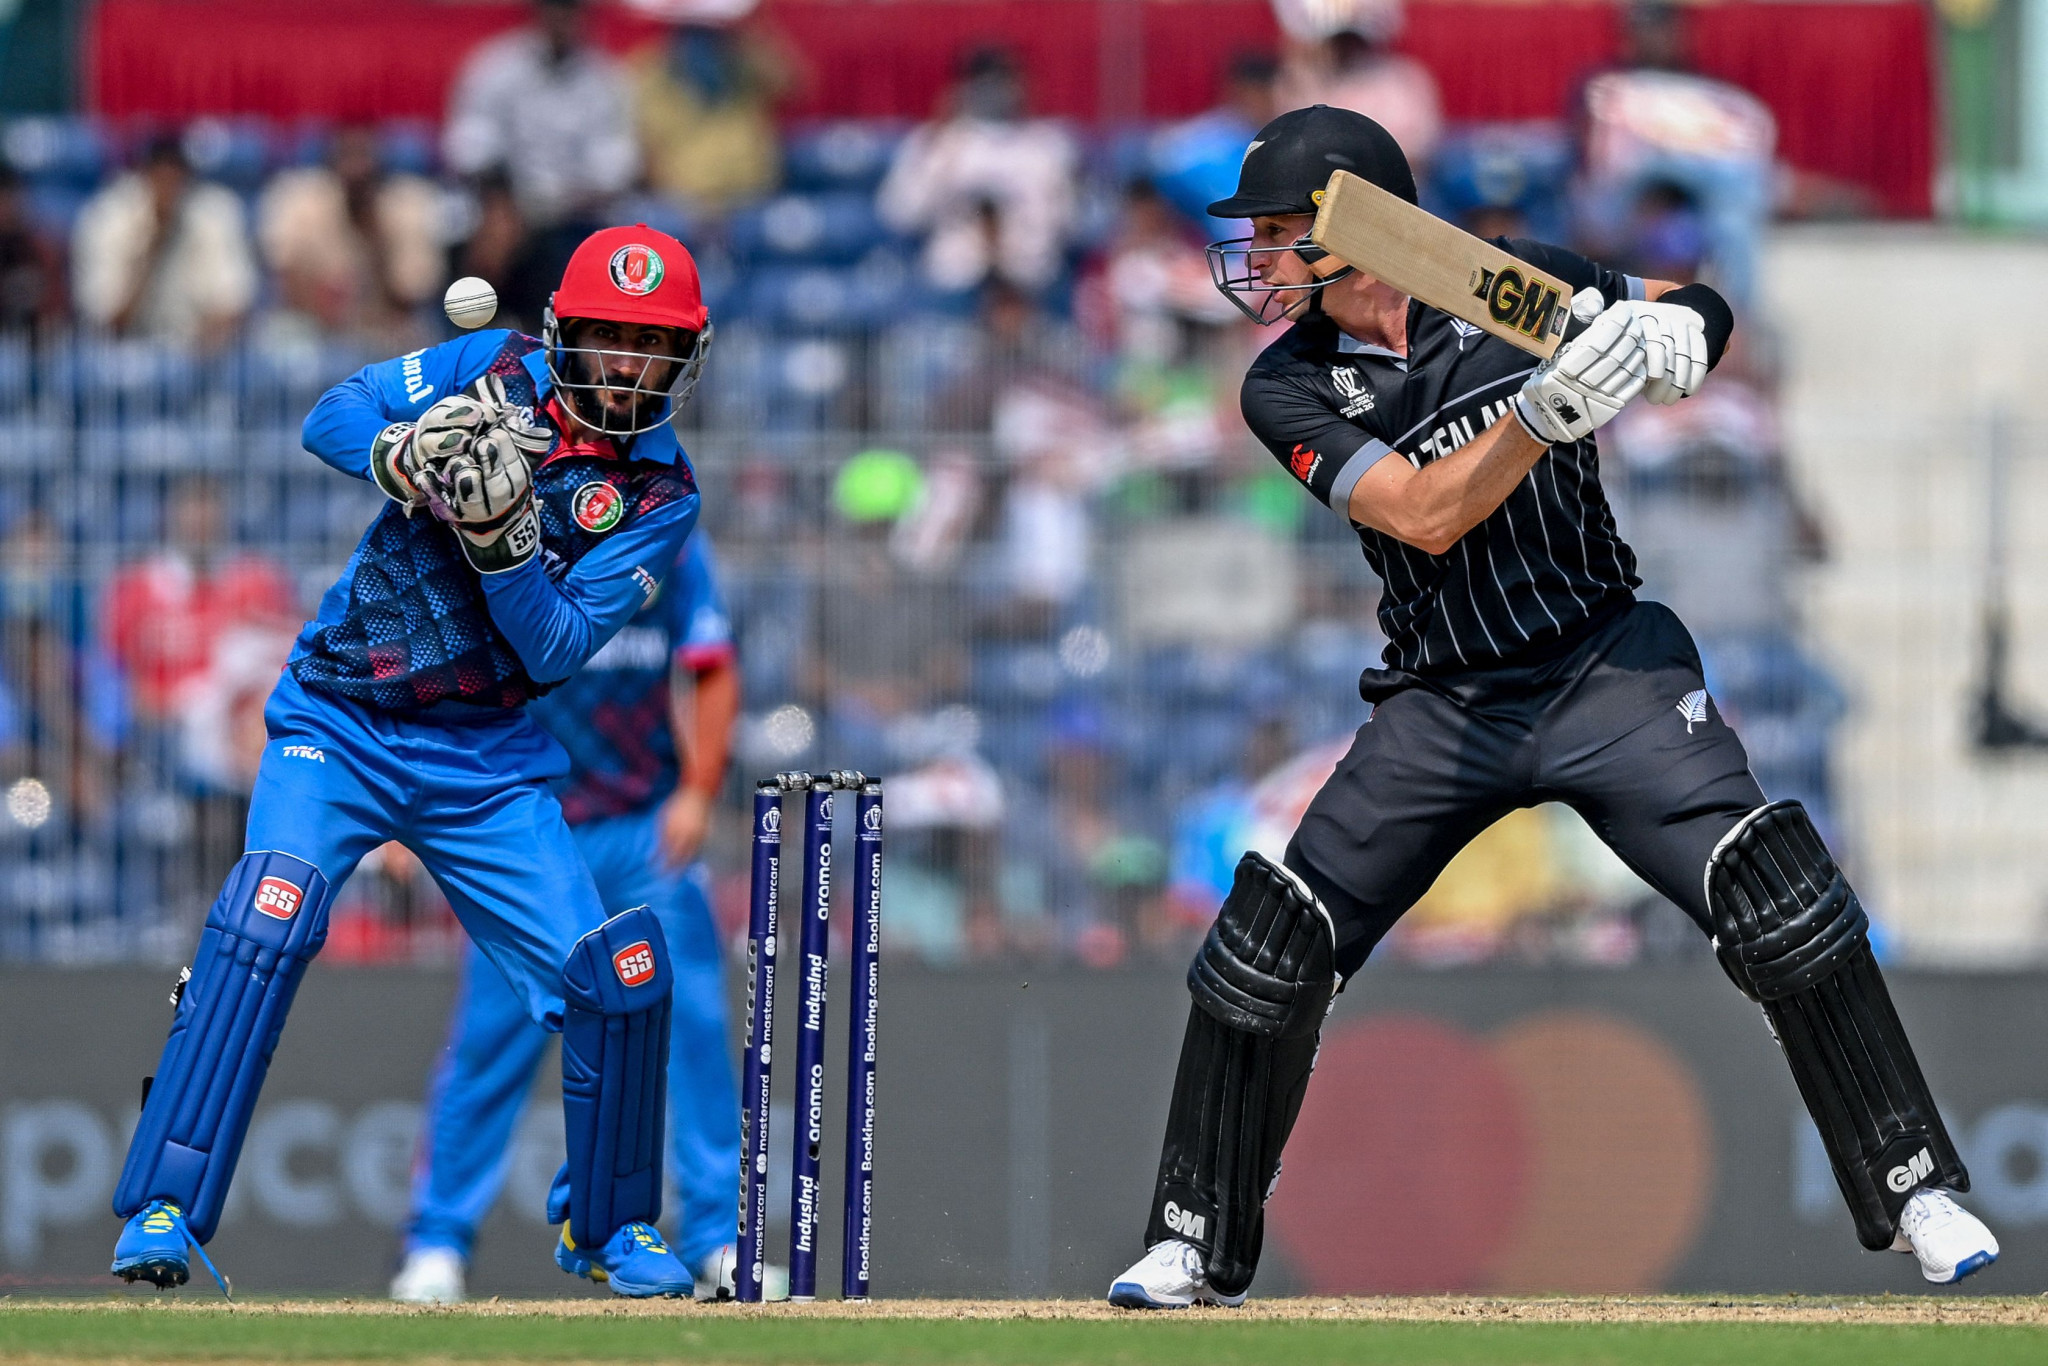 New Zealand crush Afghanistan to prevent another Cricket World Cup giant-killing